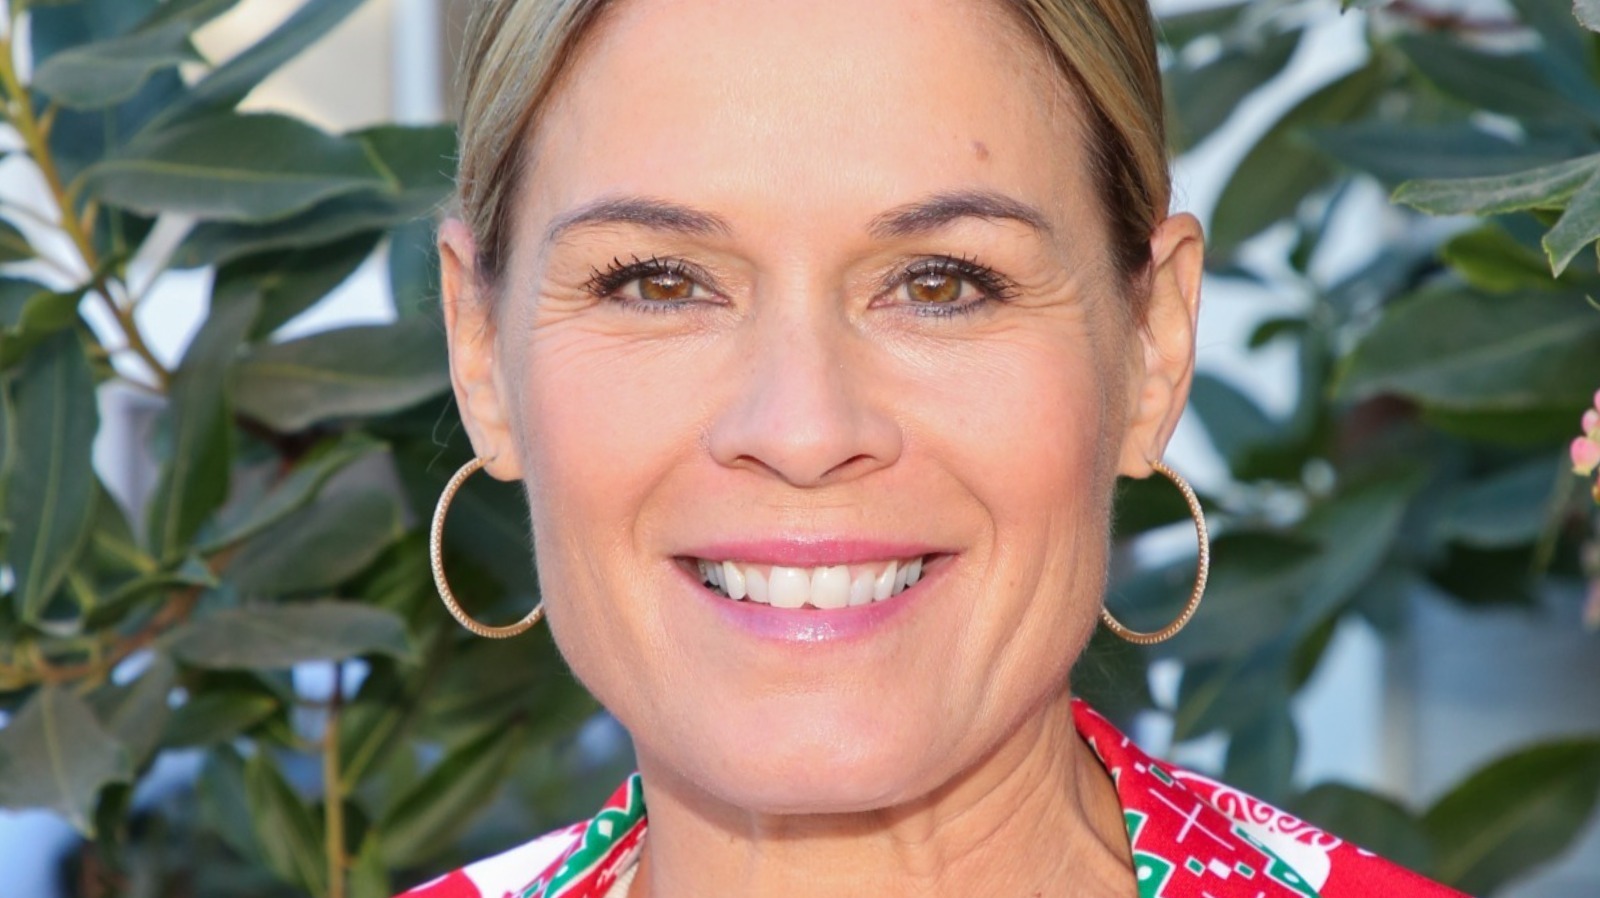 Instagram Is Applauding Cat Cora's Son's Cooking Accomplishment